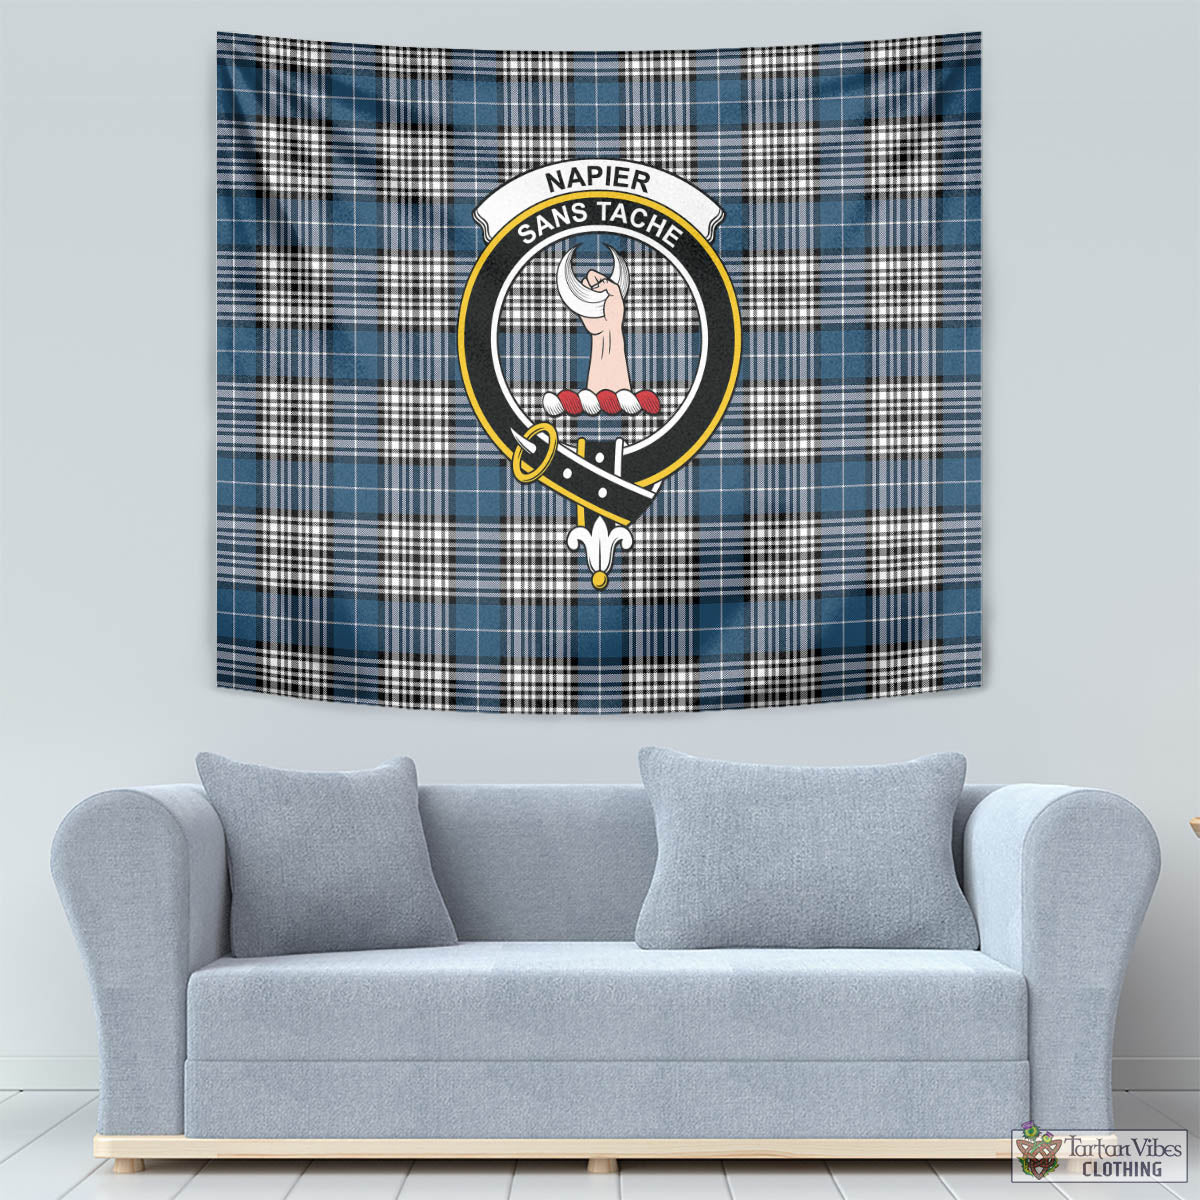 Tartan Vibes Clothing Napier Modern Tartan Tapestry Wall Hanging and Home Decor for Room with Family Crest